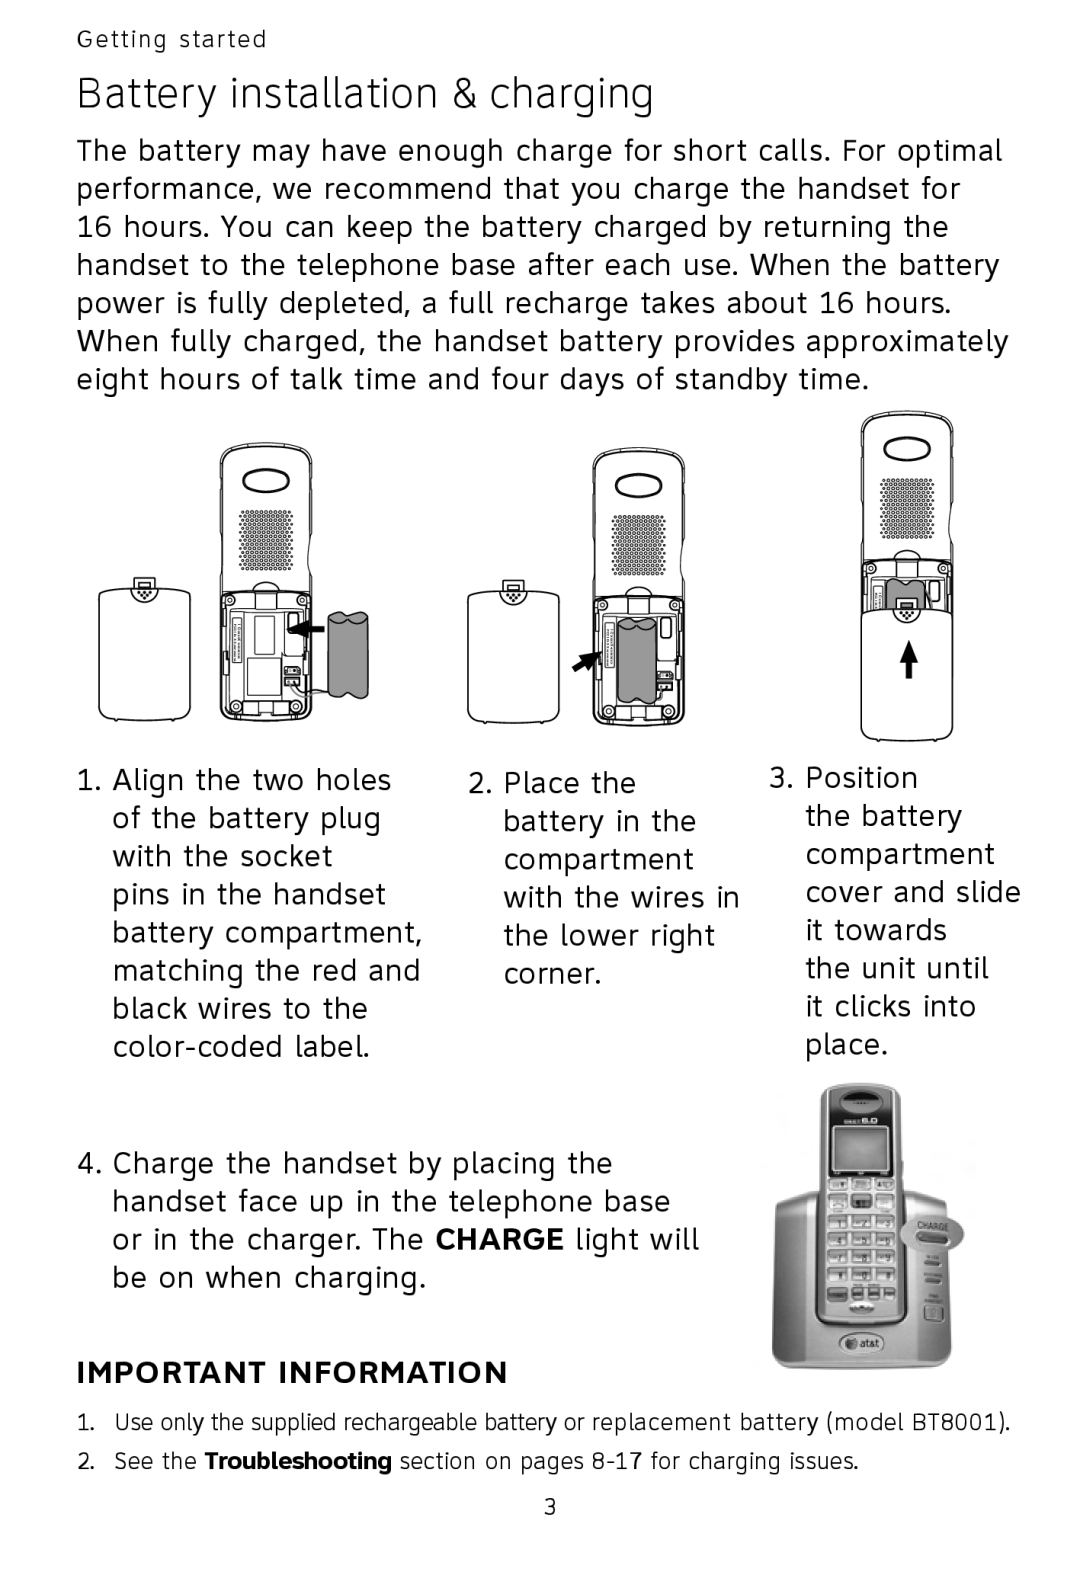 AT&T AT3101 user manual Battery installation & charging, Important Information 